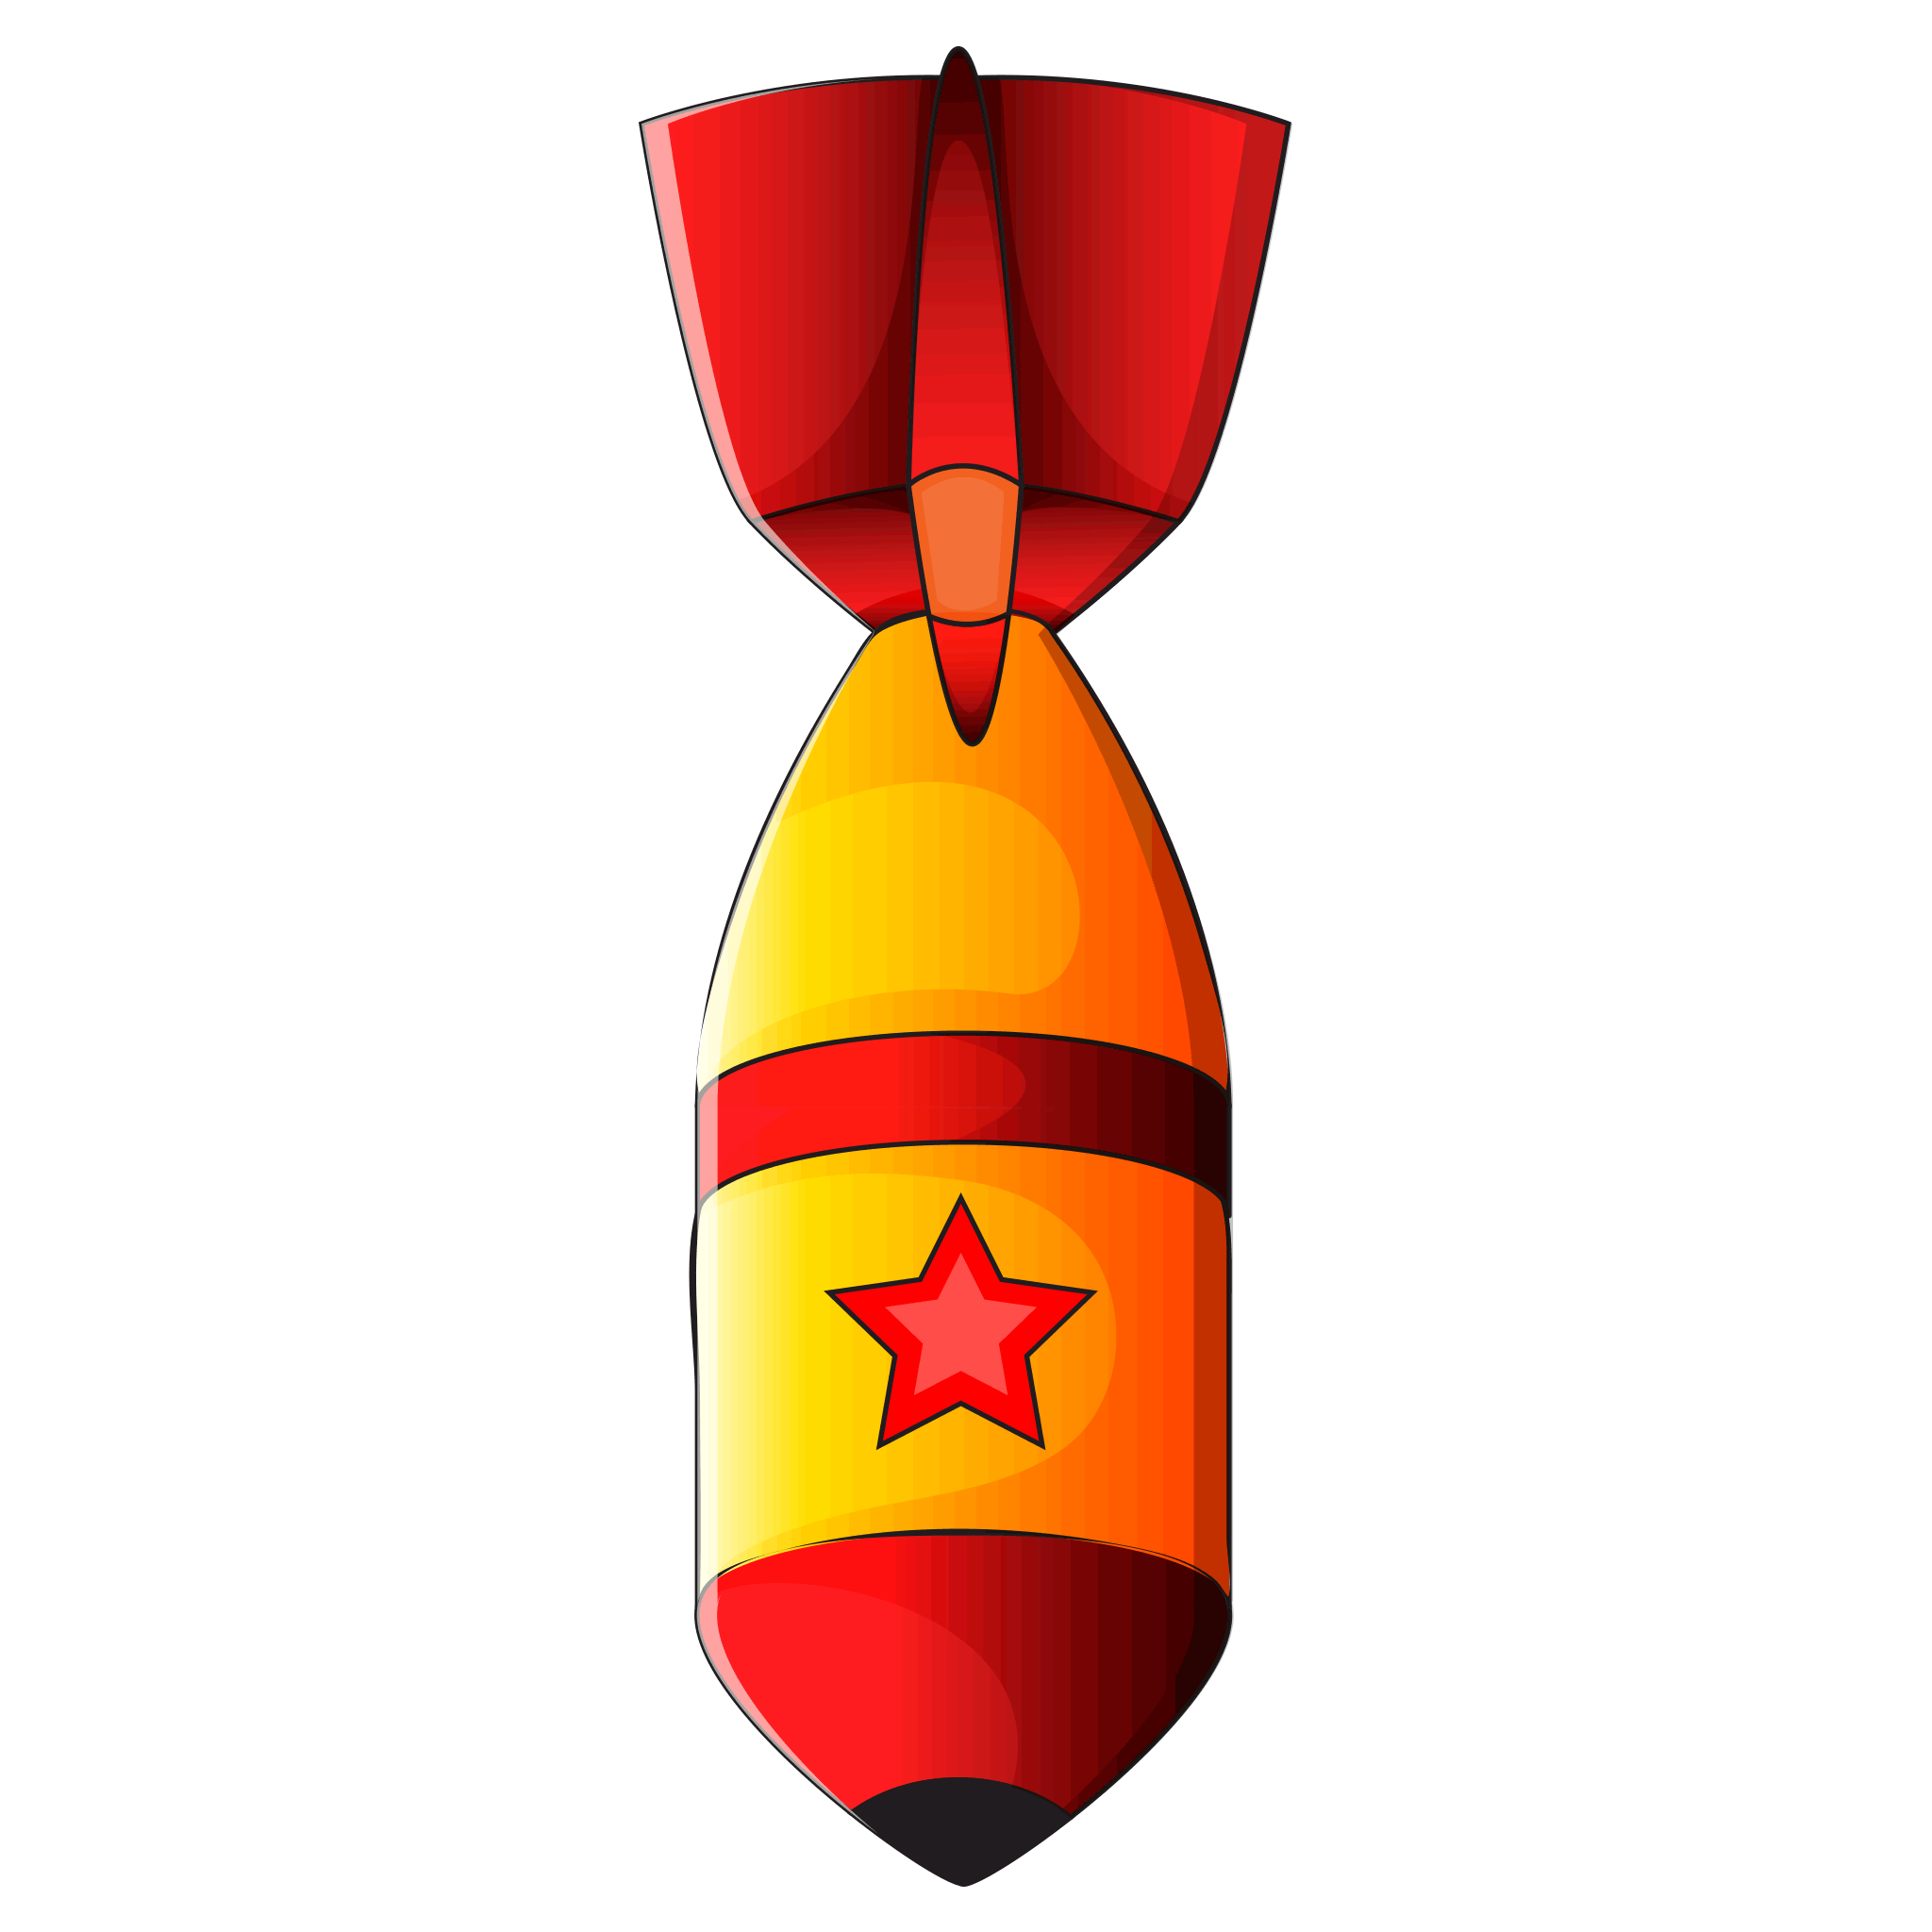 Bomb Background PNG Image